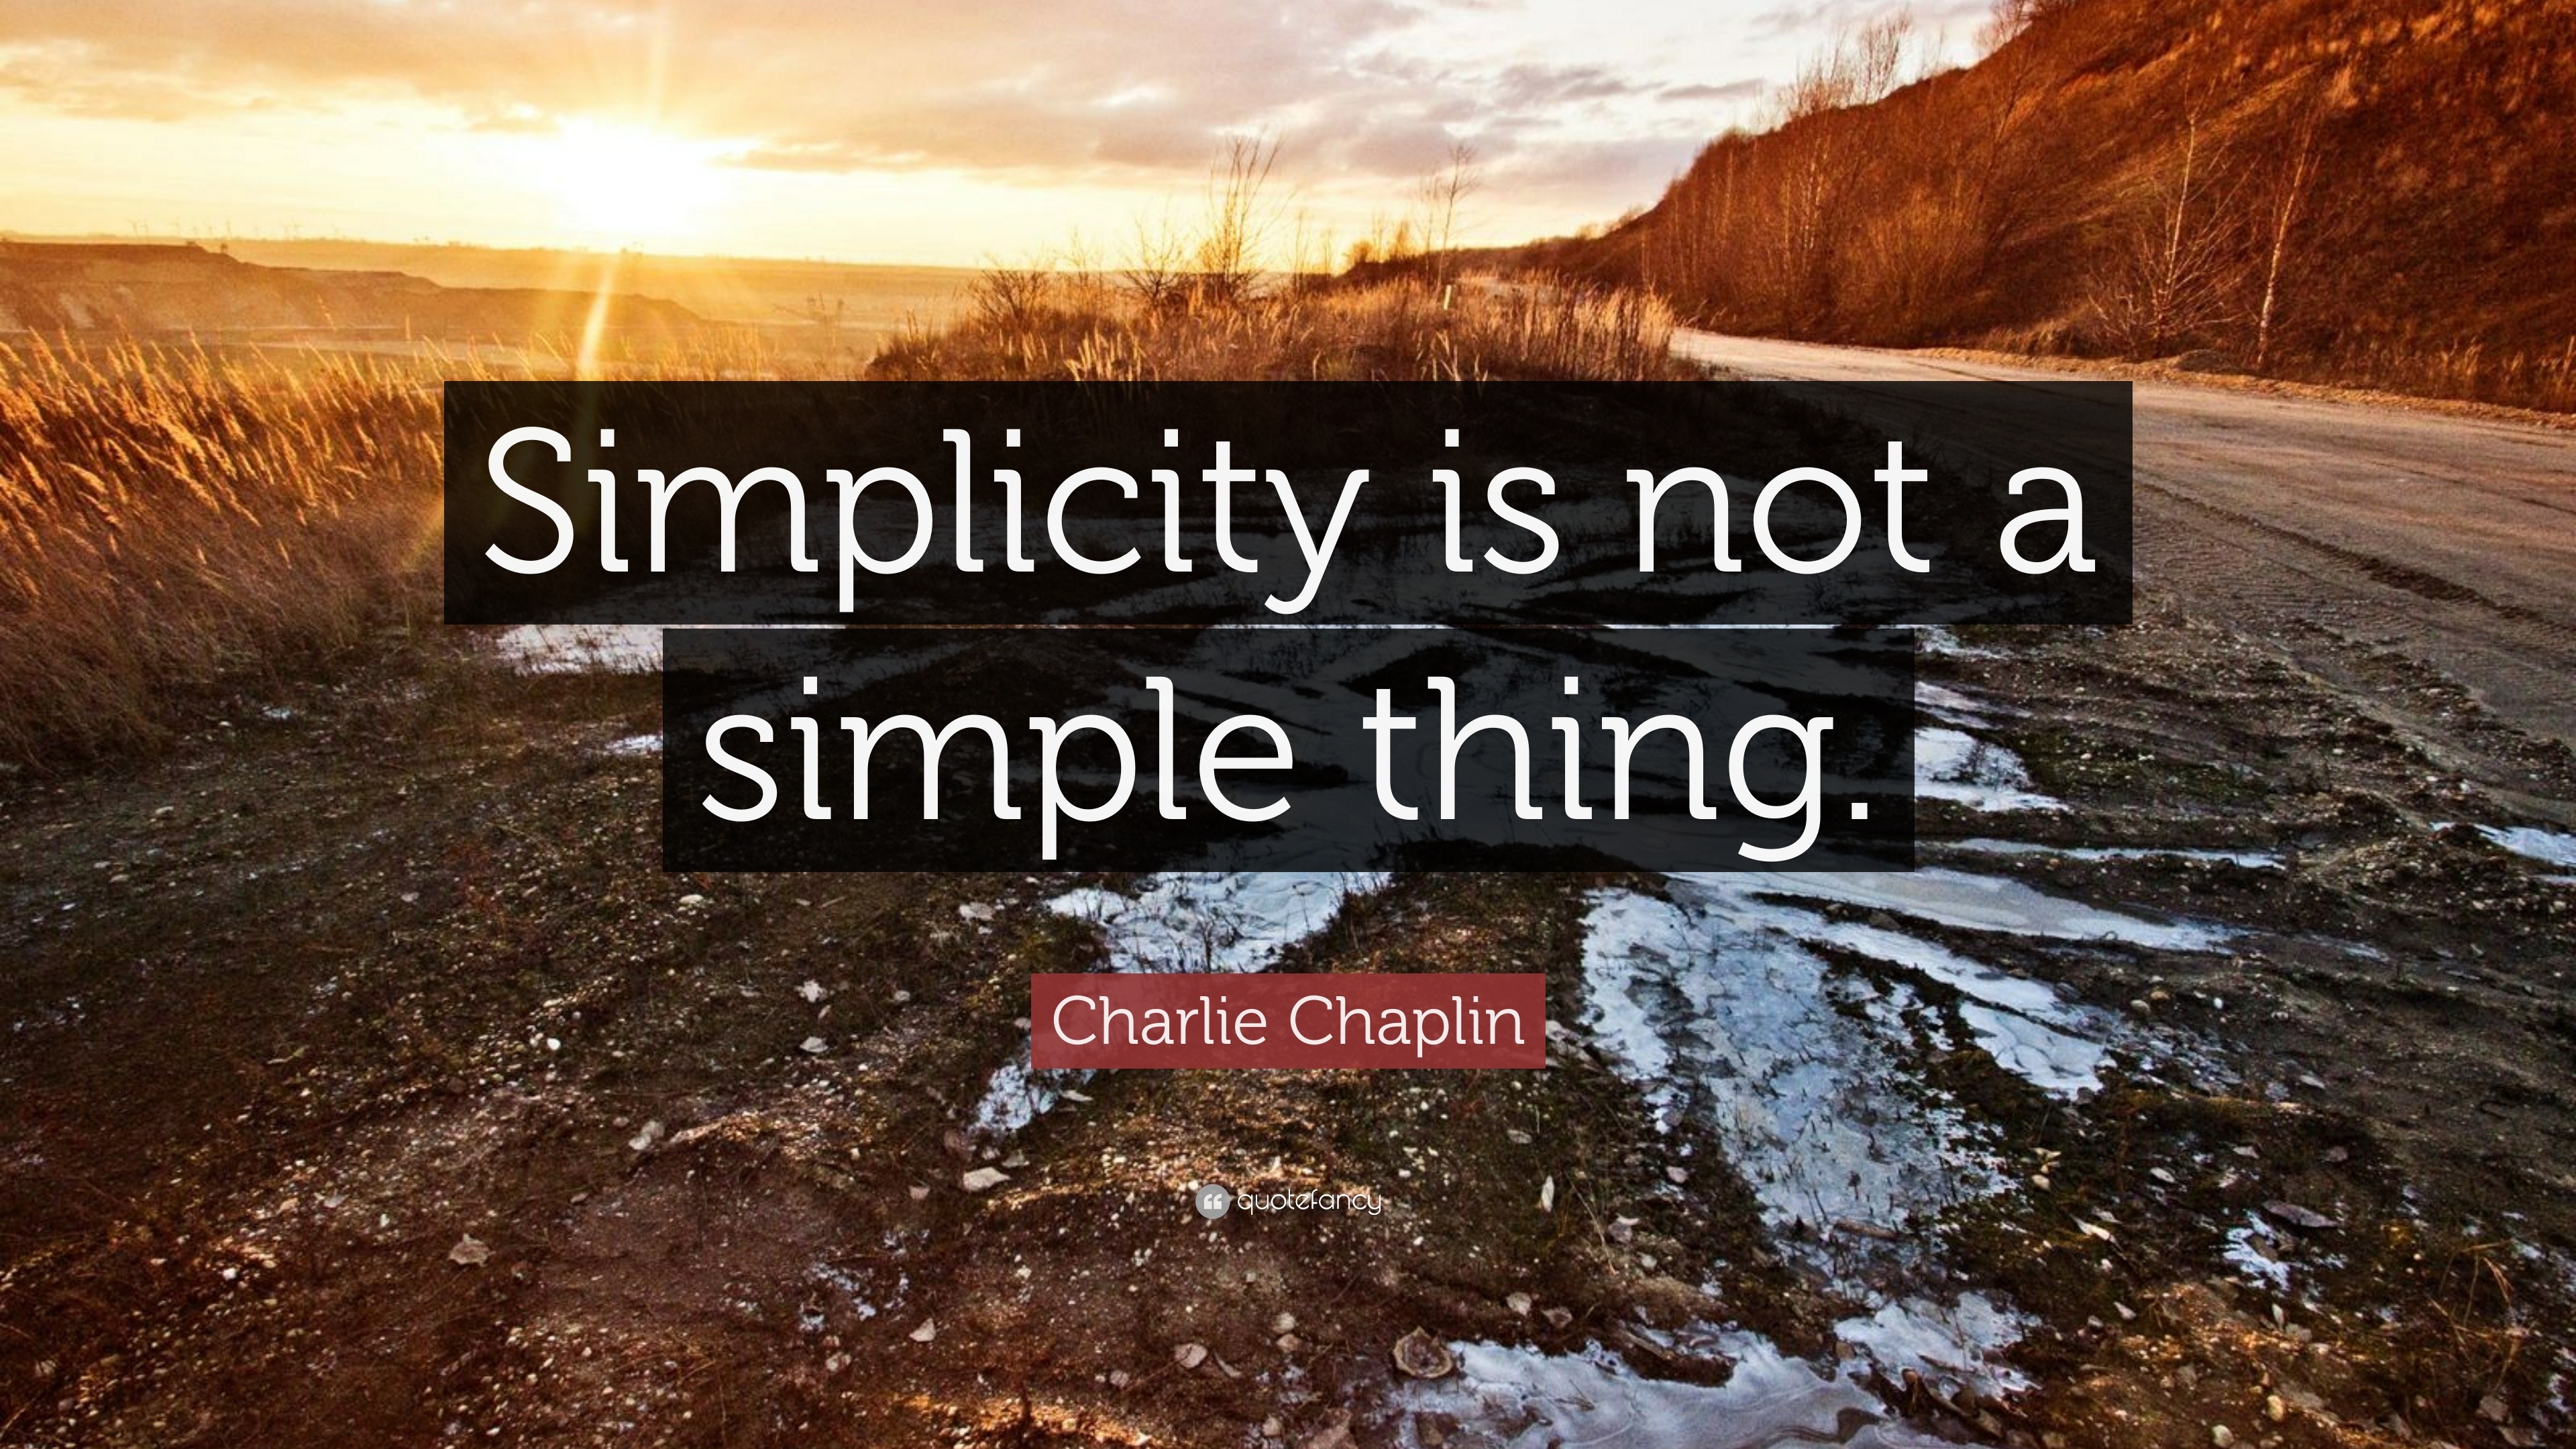  Simplicity  Quotes  40 wallpapers Quotefancy